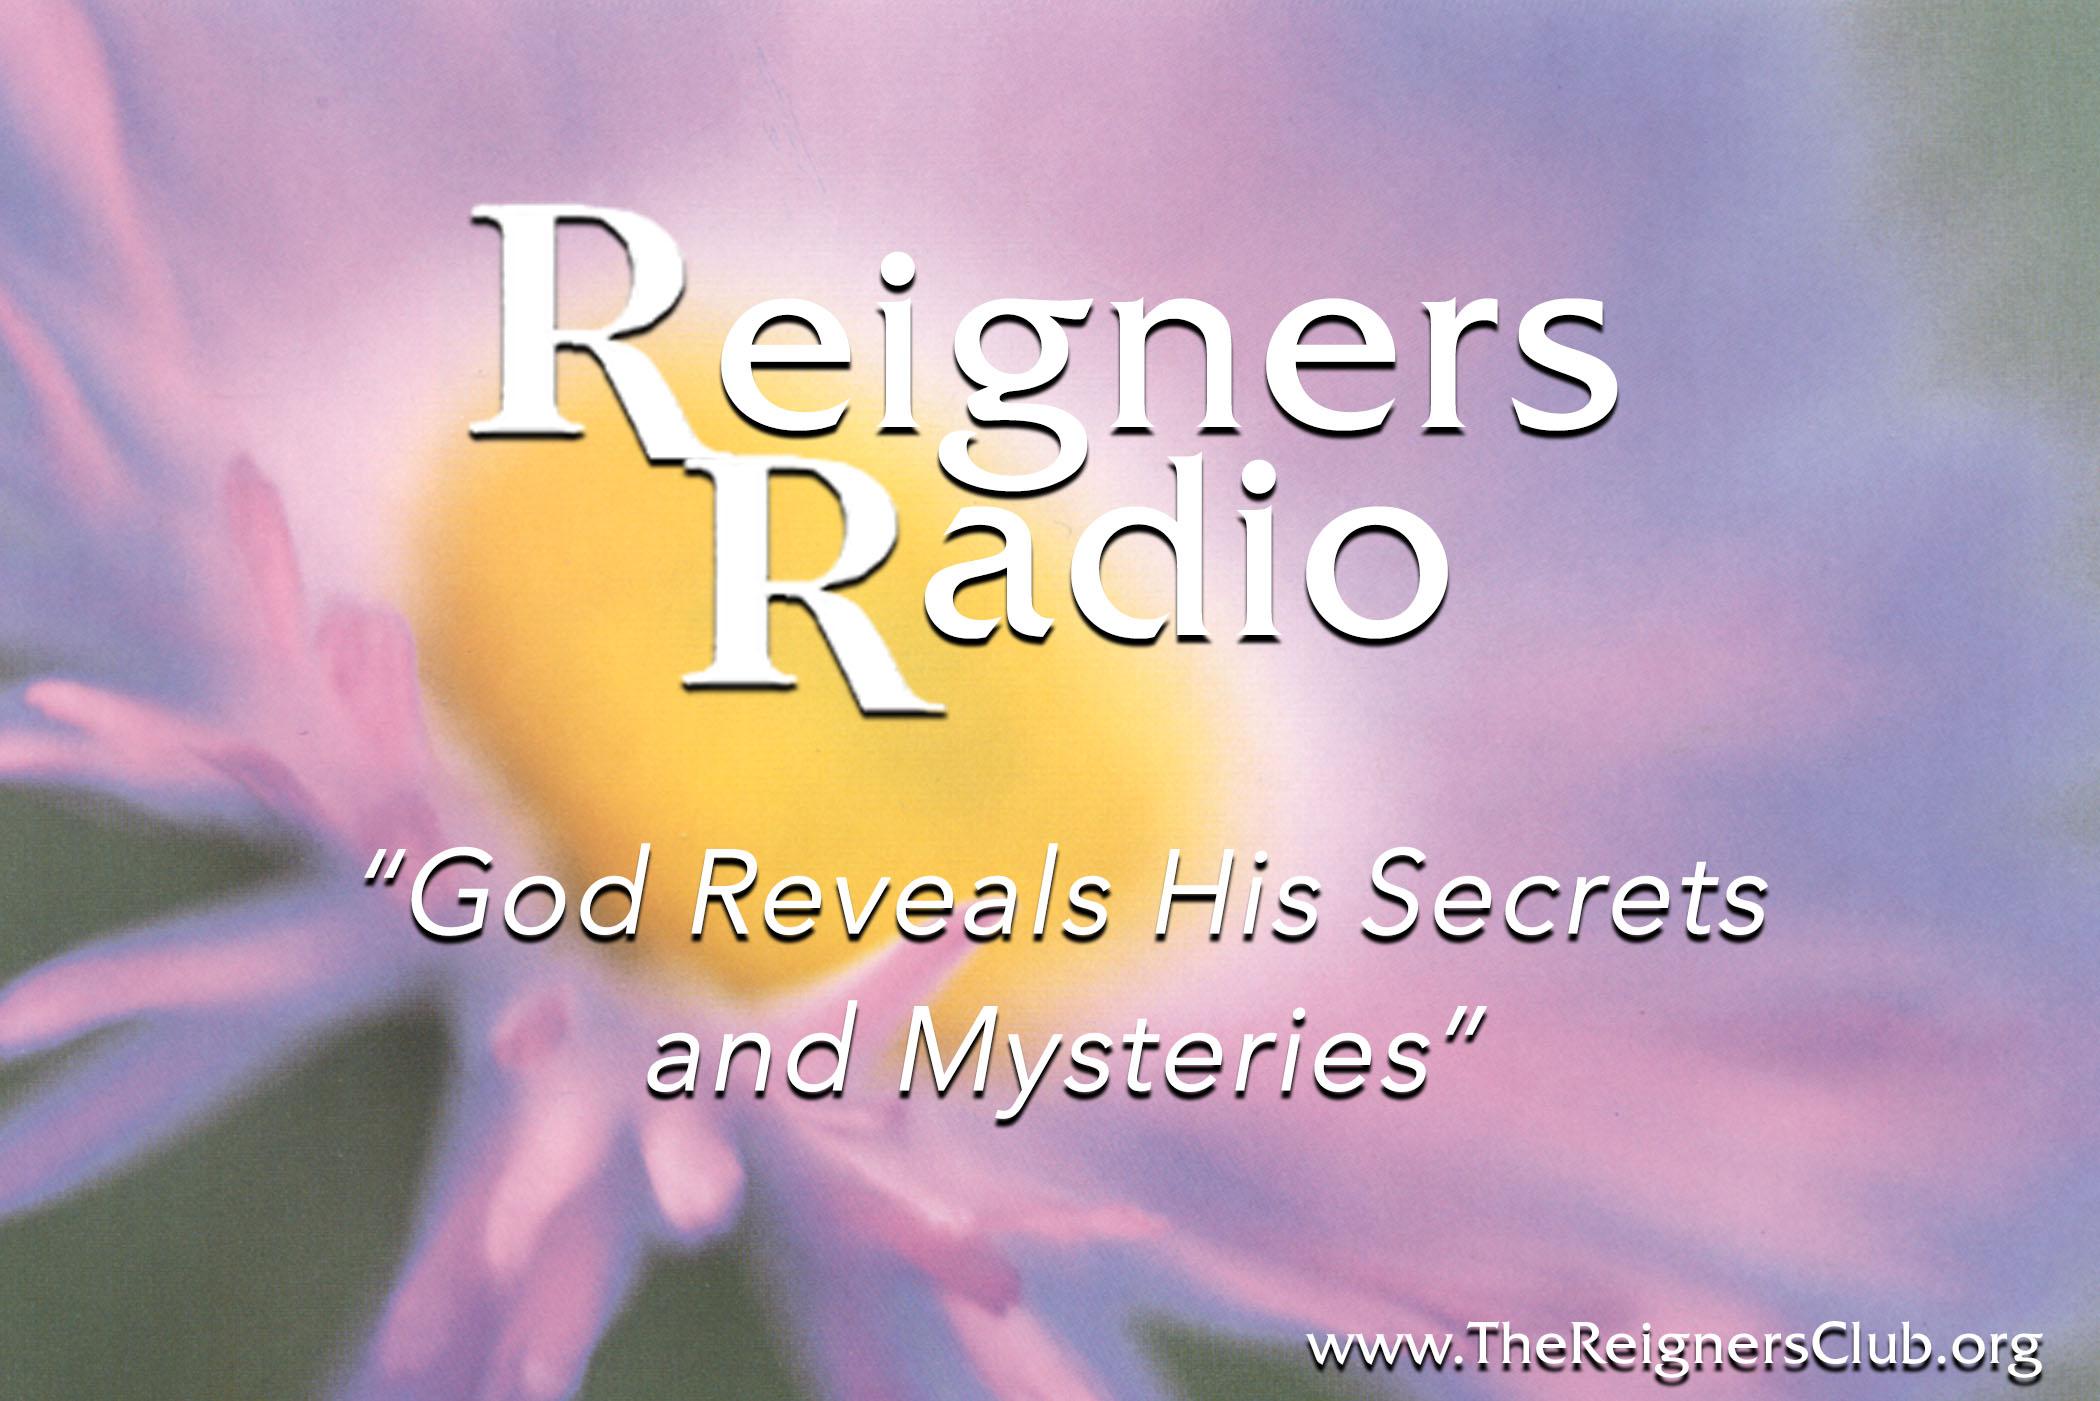 God Reveals His Secrets and Mysteries